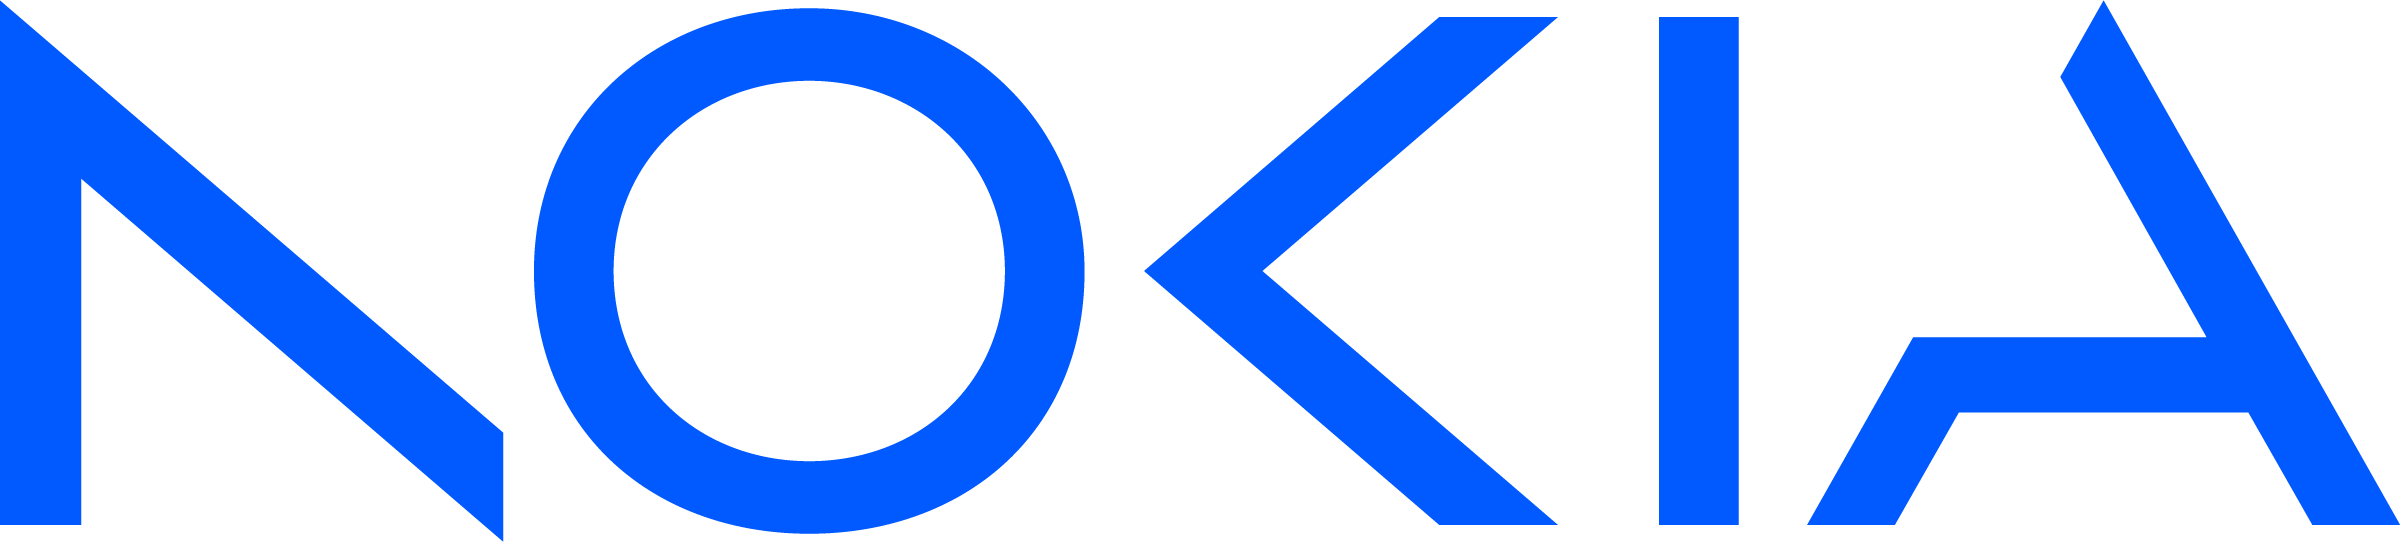 Nokia Solutions and Networks GmbH & Co. KG